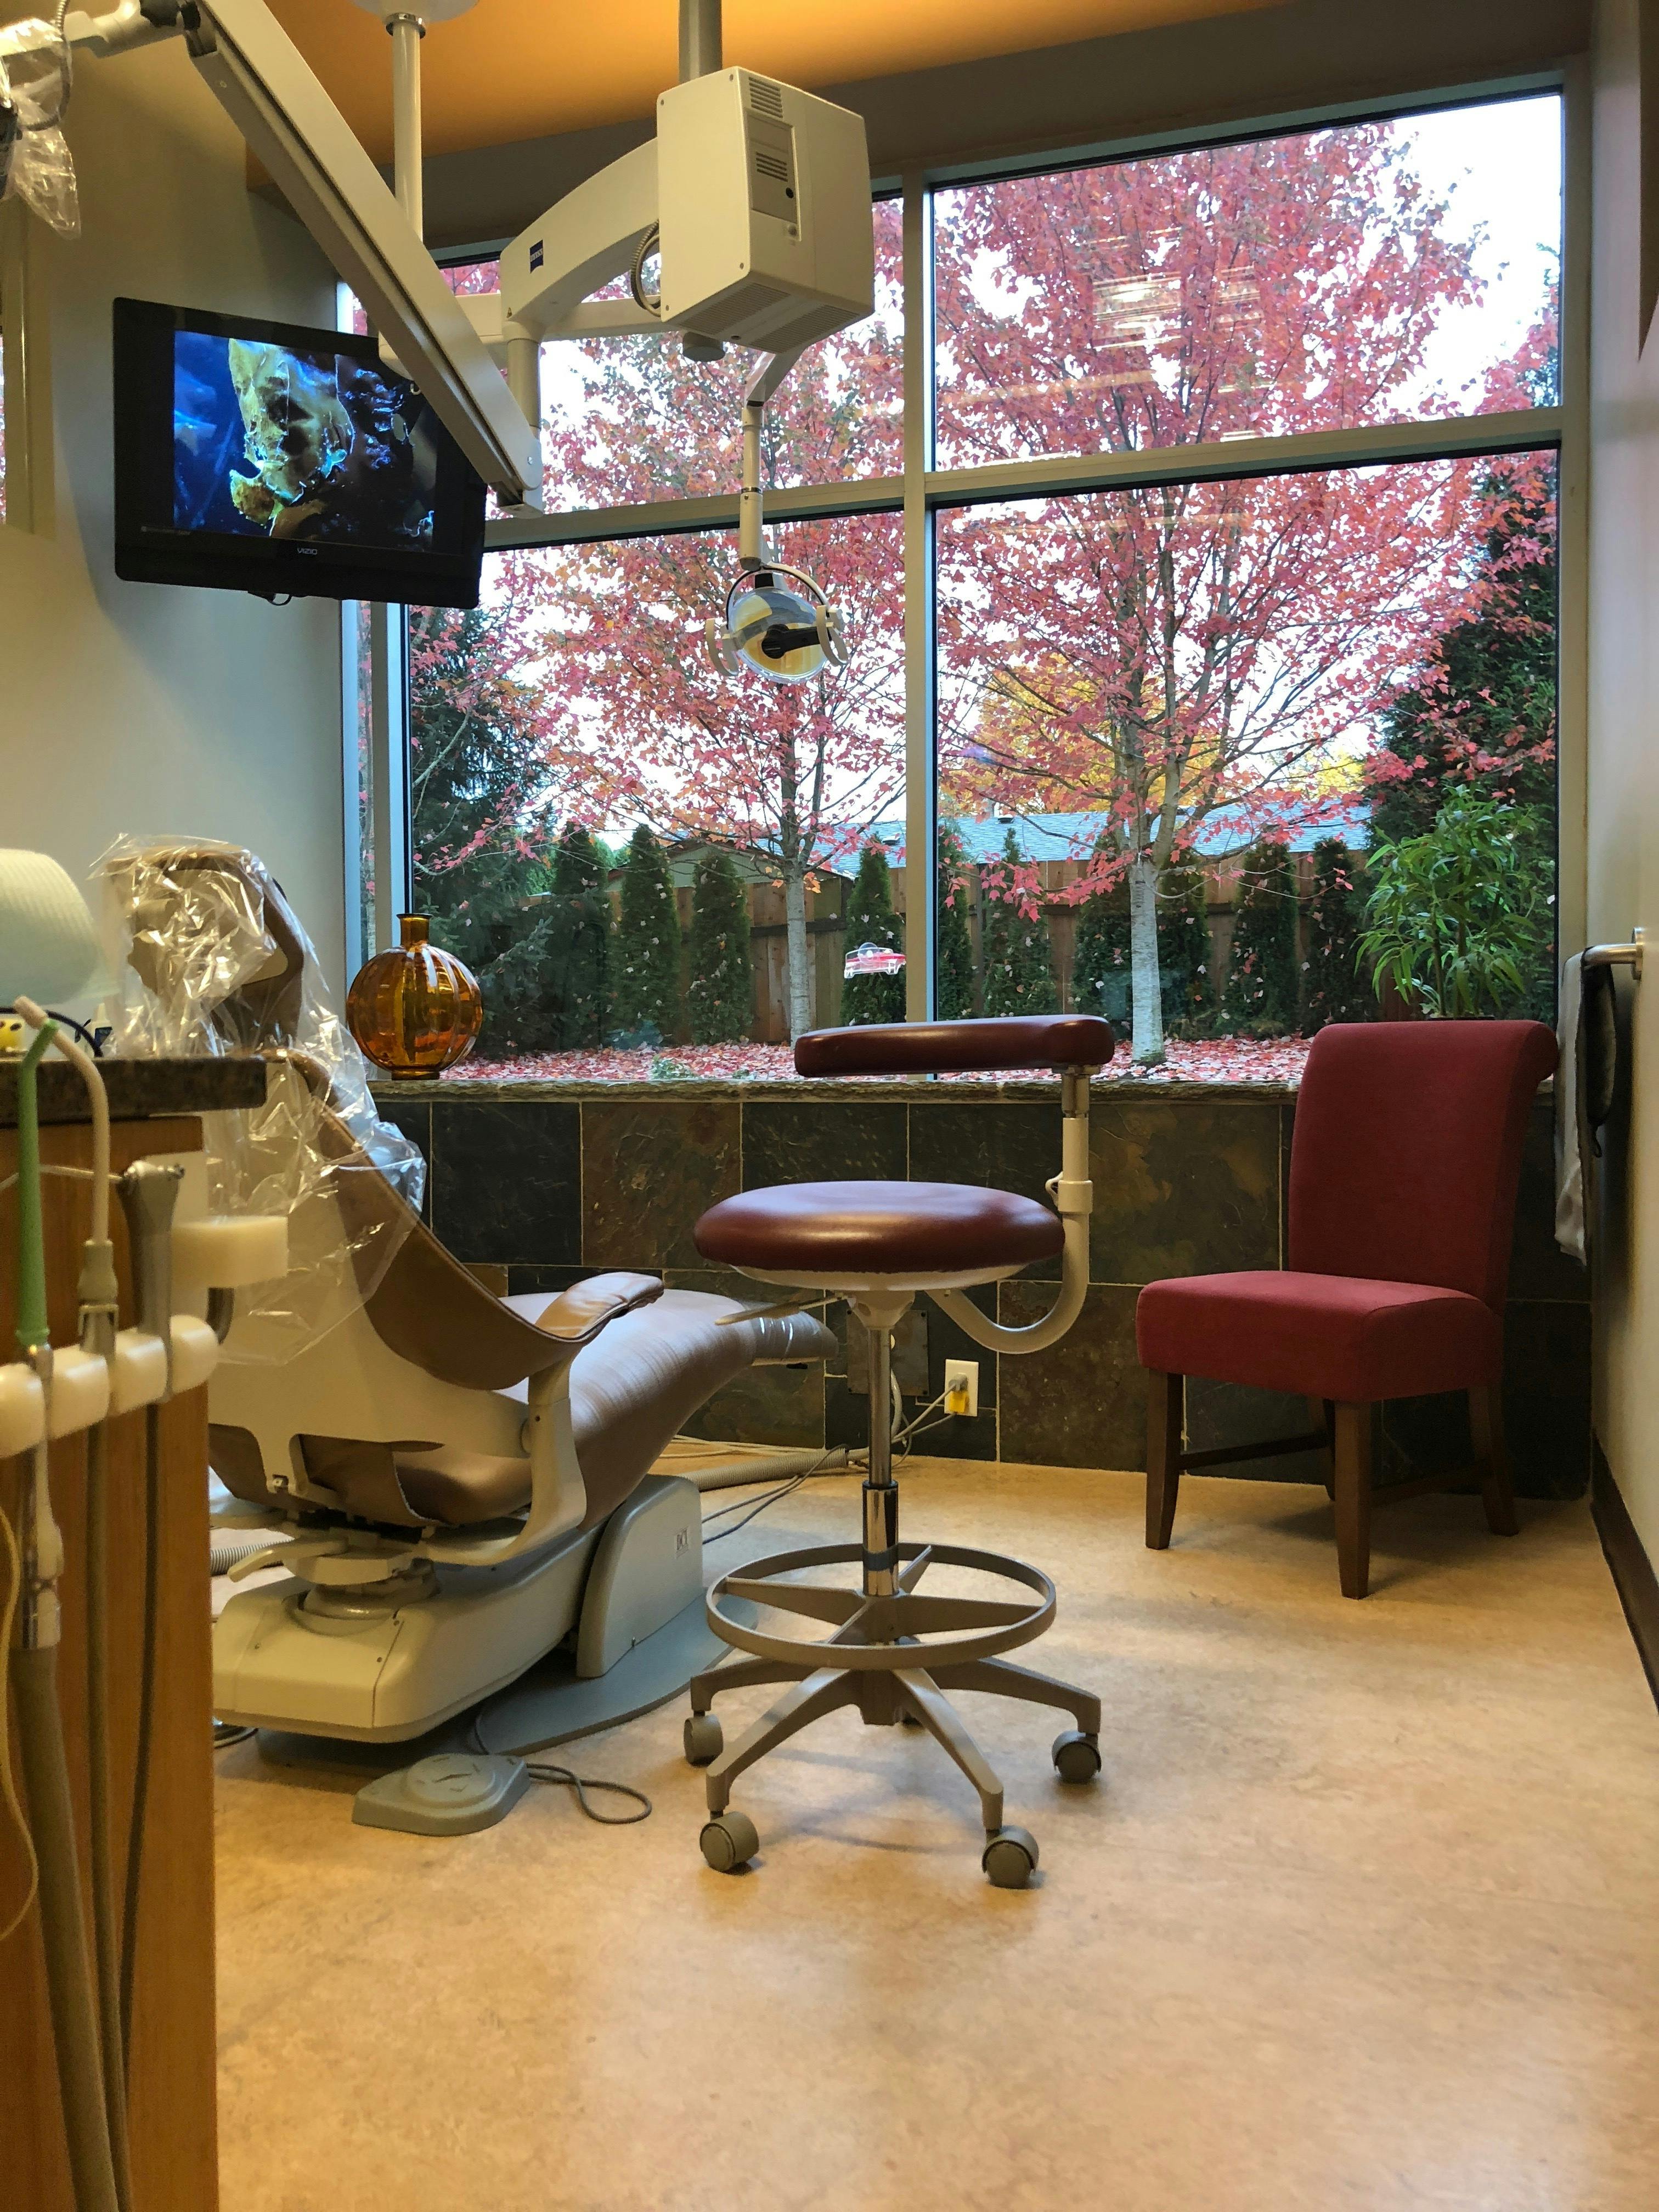 Free stock photo of dentist, Dr. John Kevin Schow